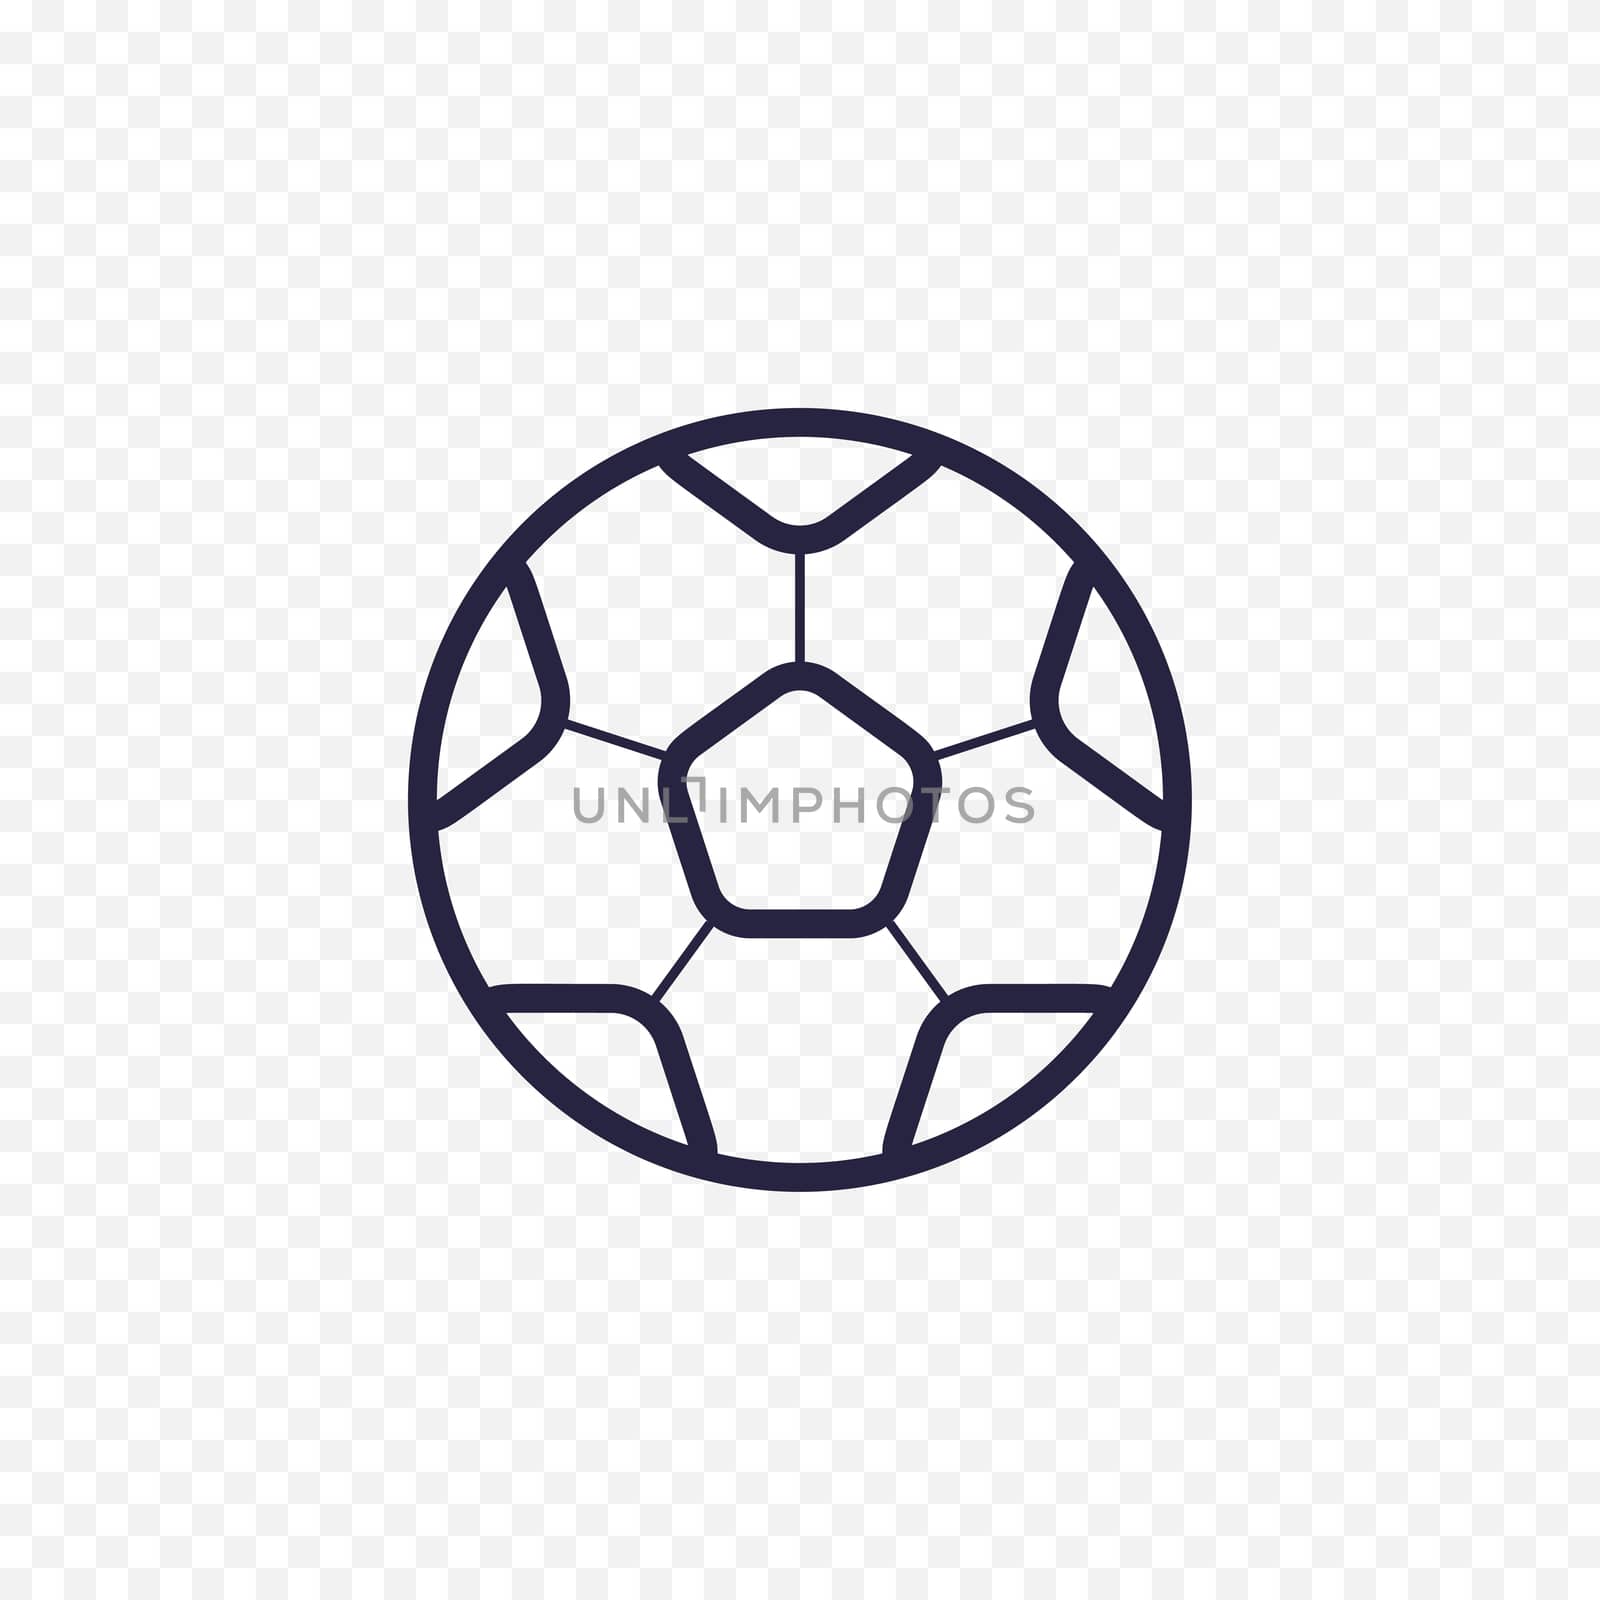 Soccer ball simple line icon. Football game thin linear signs. Outline sport championship concept for websites, infographic, mobile app.